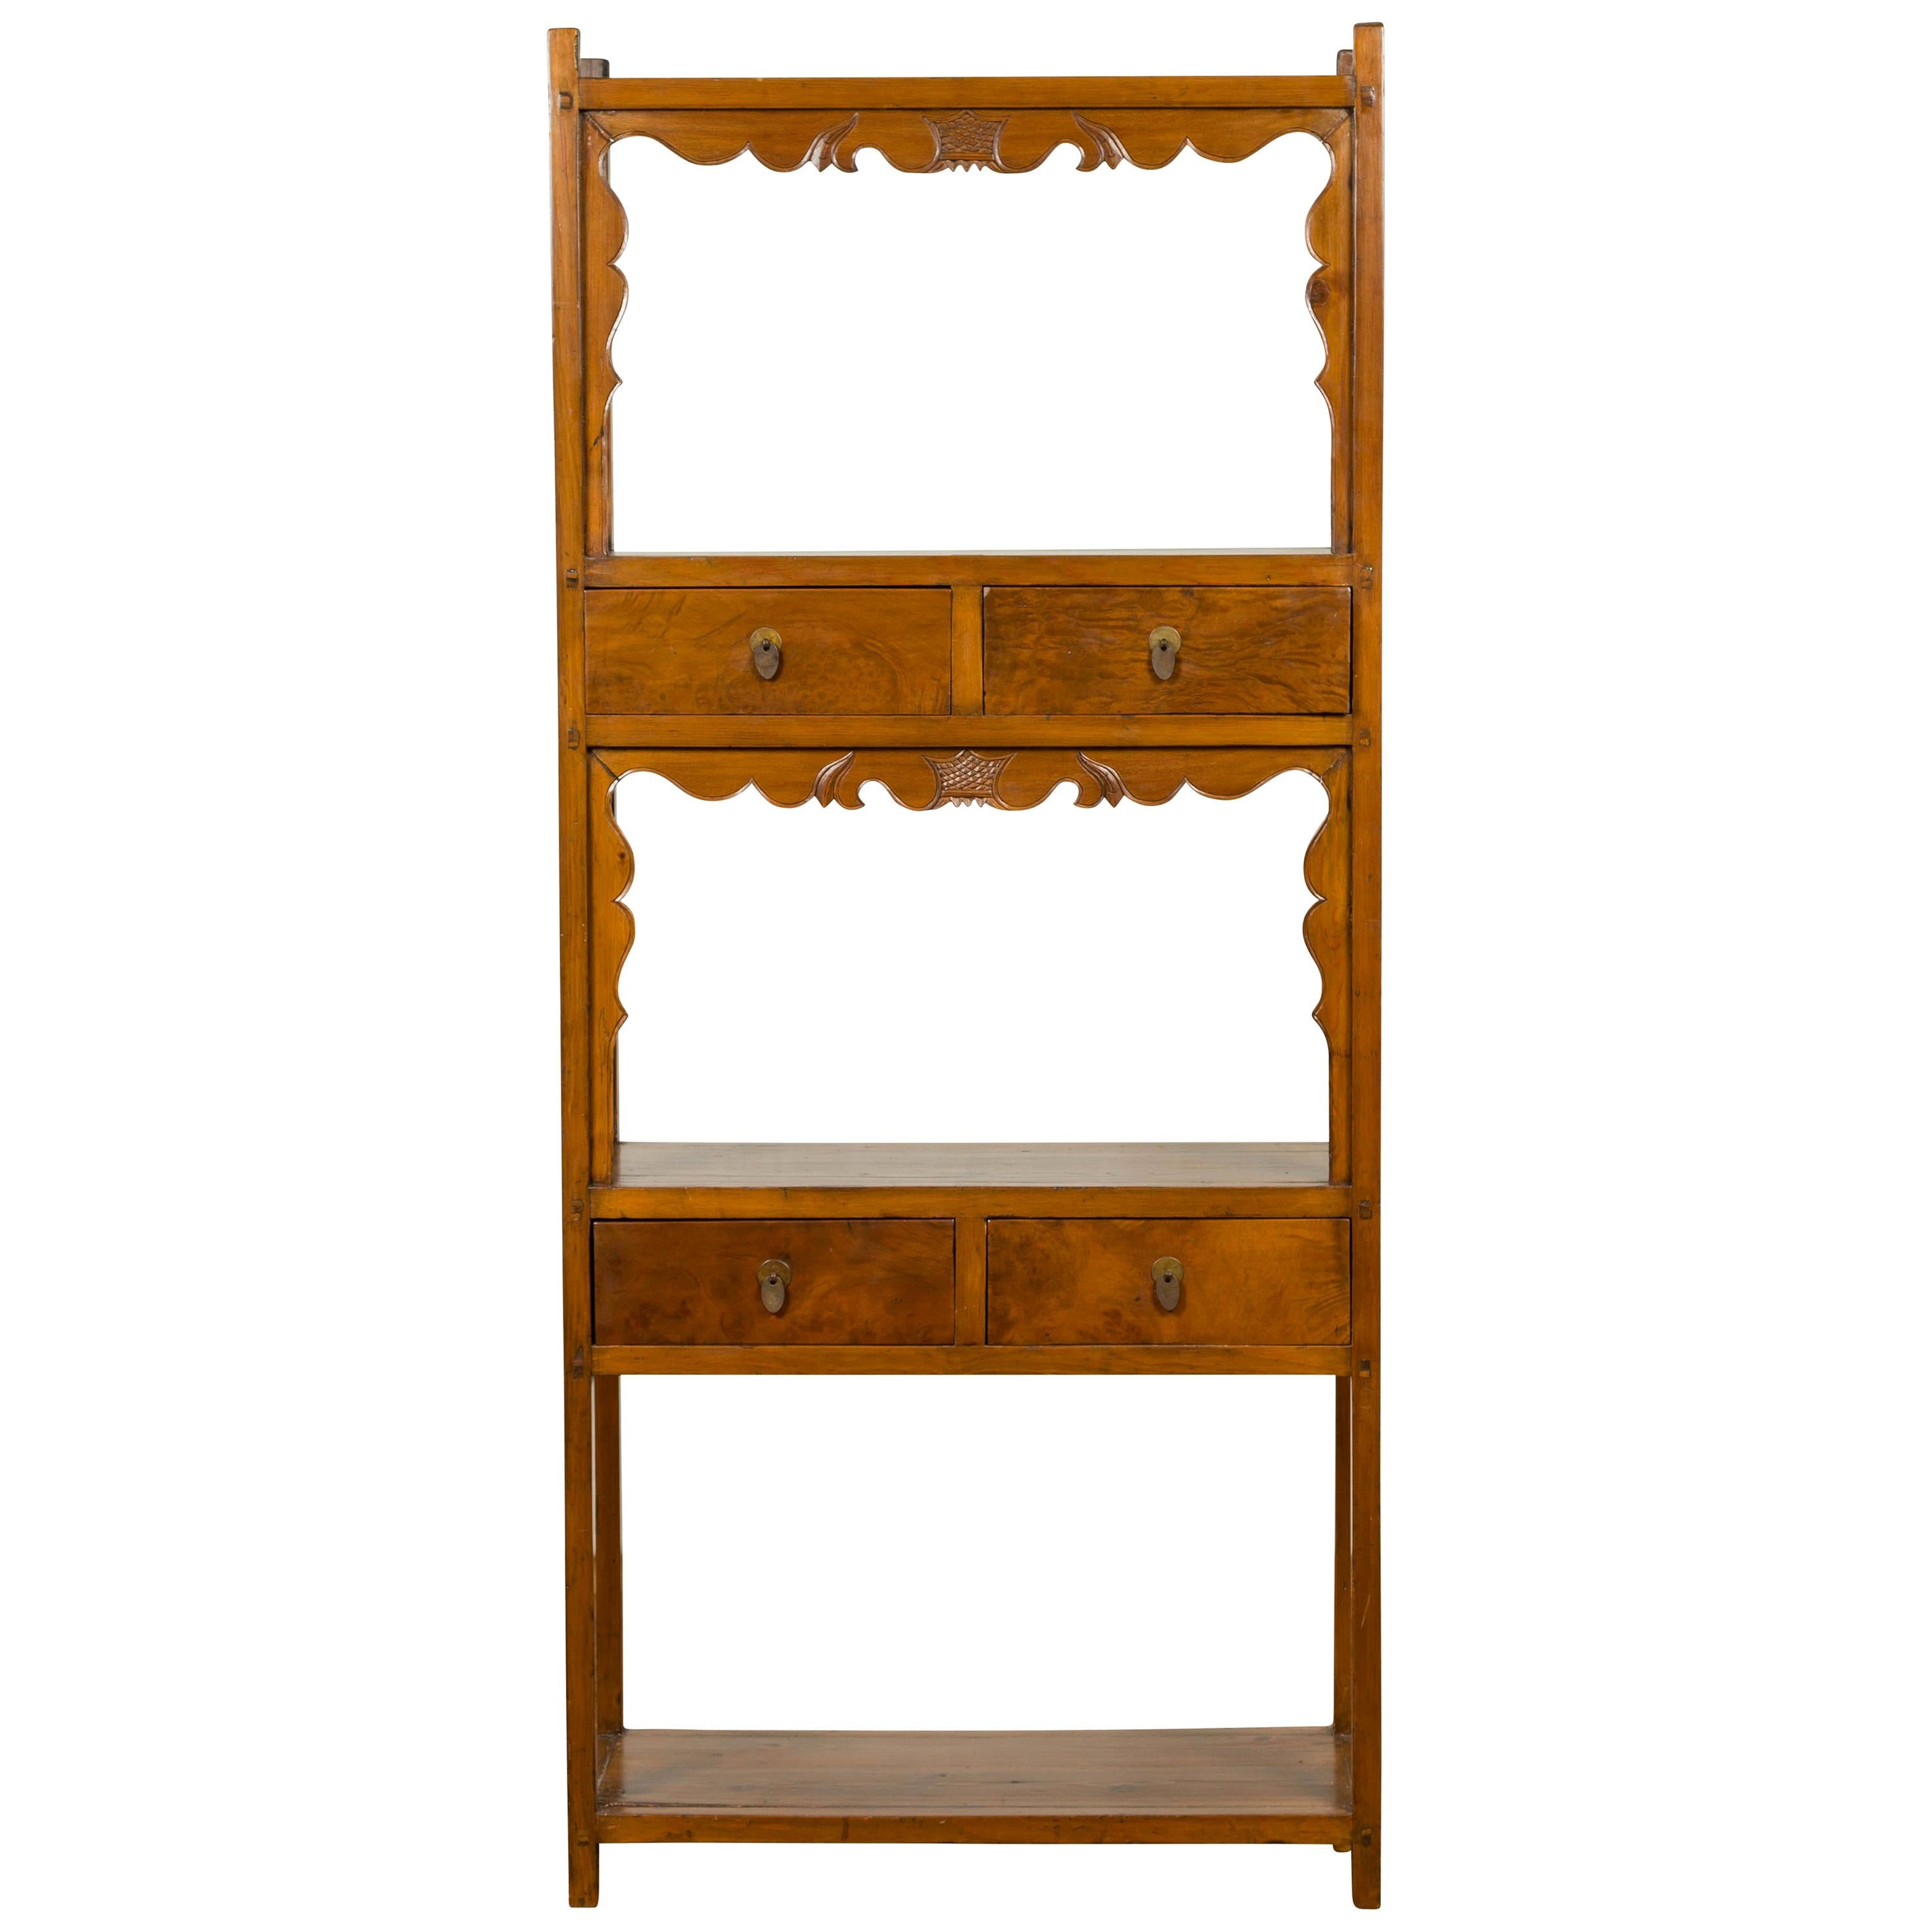 Chinese Qing Dynasty 19th Century Elm Bookcase with Open Shelves and Drawers